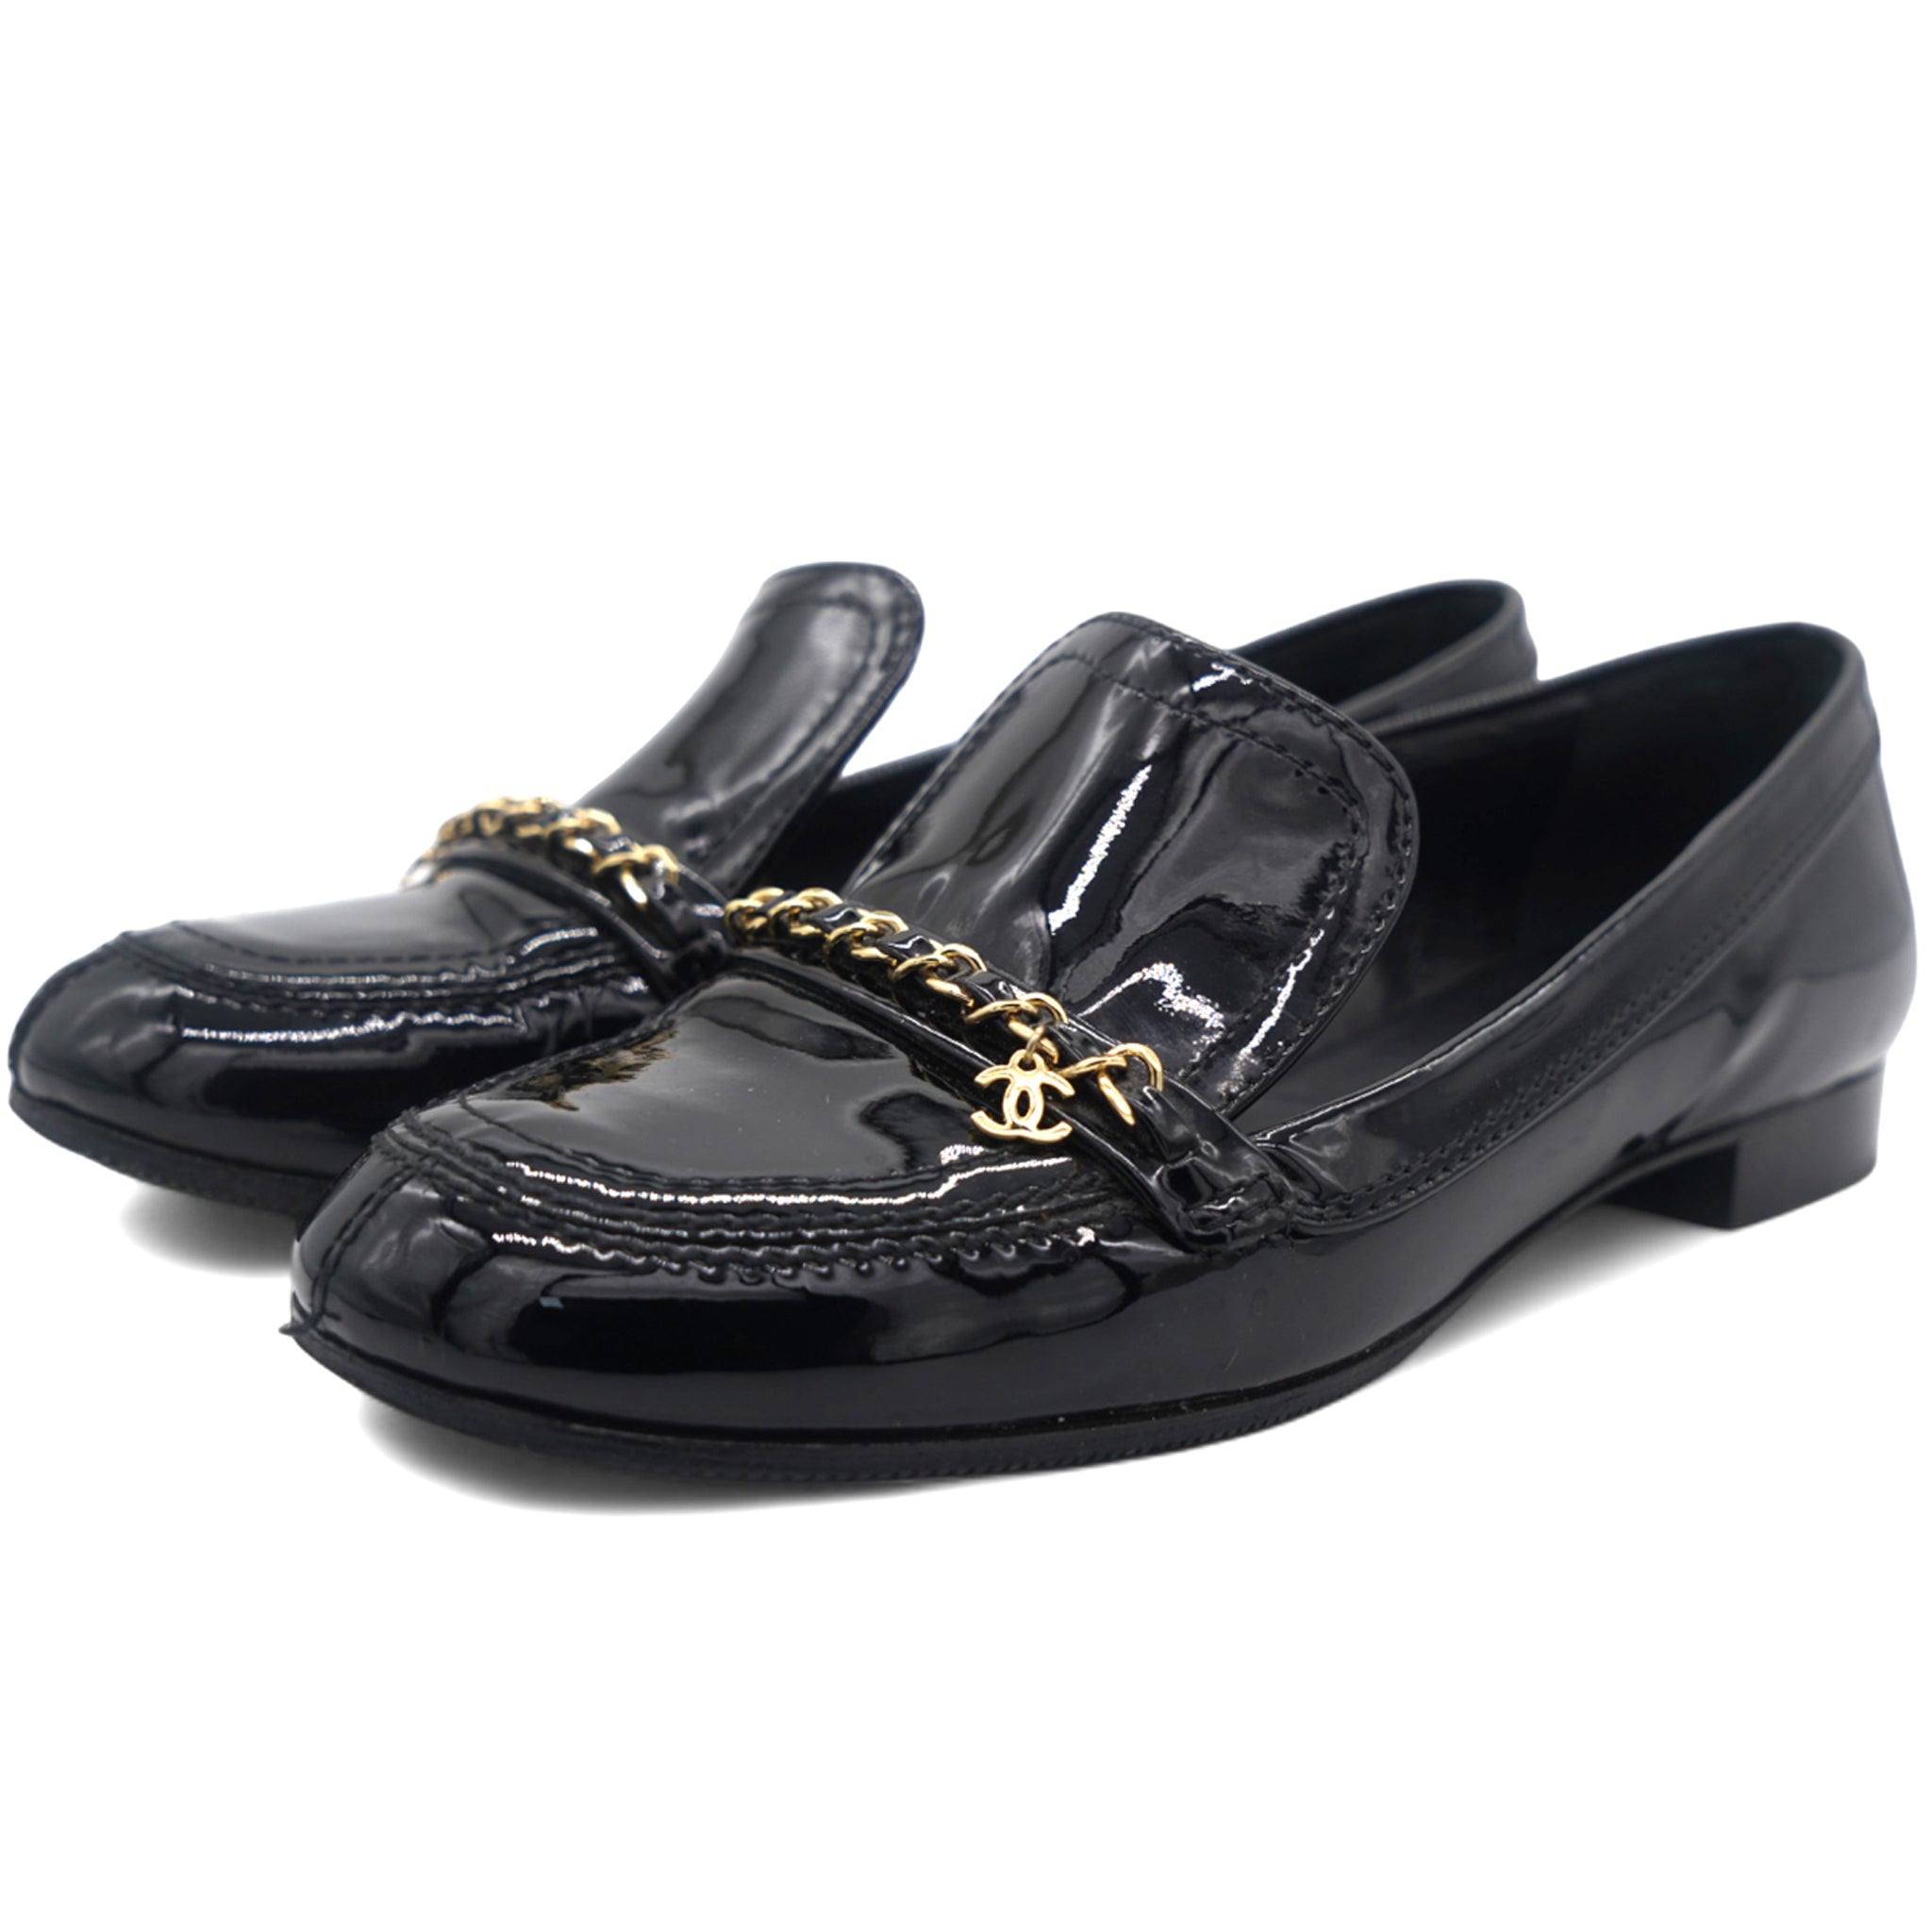 Black Leather Chain Detail Flat Loafers 37.5